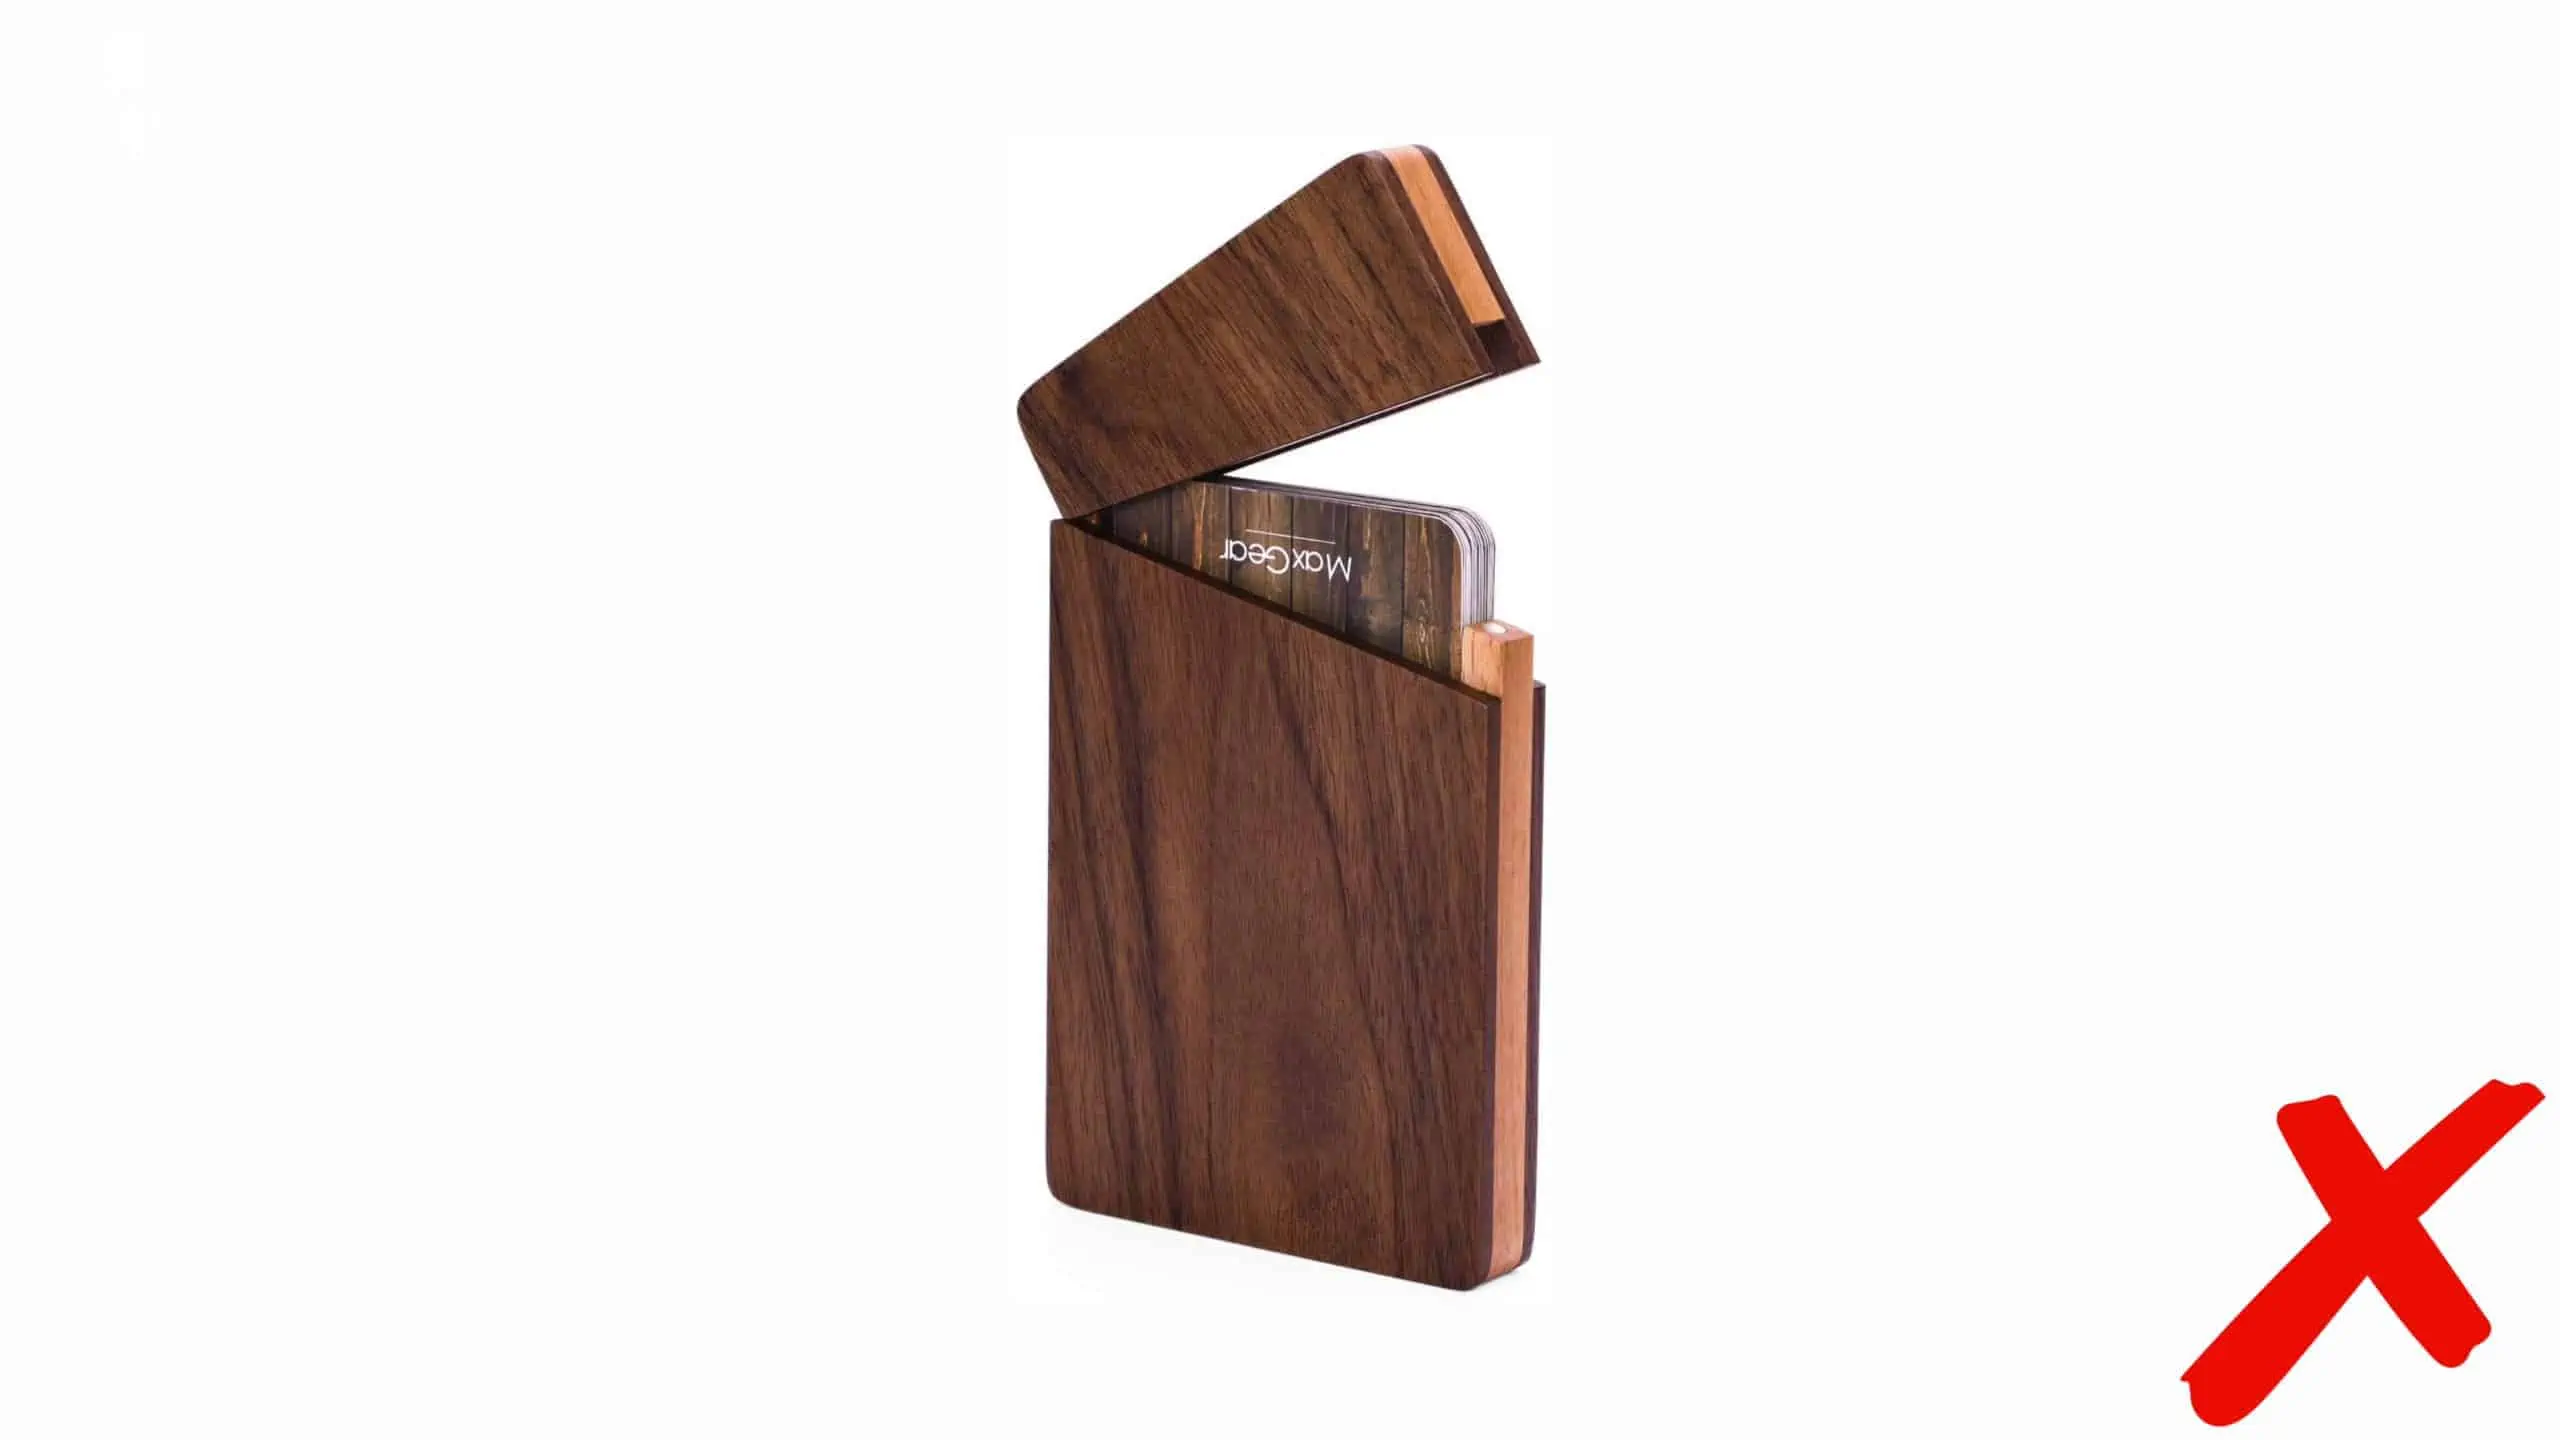 A business card holder in an extremely modern and trendy design